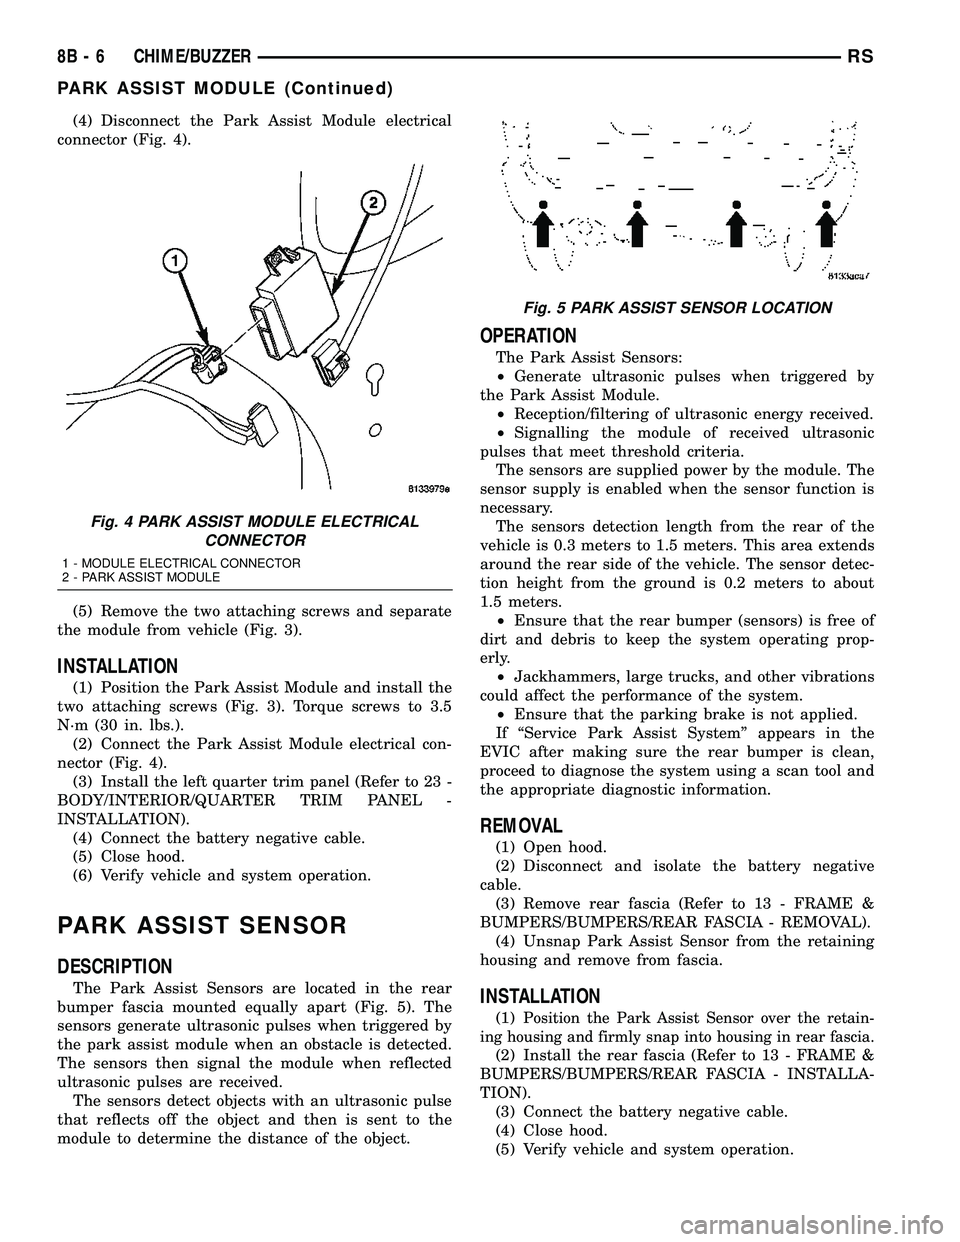 CHRYSLER CARAVAN 2005  Service Manual (4) Disconnect the Park Assist Module electrical
connector (Fig. 4).
(5) Remove the two attaching screws and separate
the module from vehicle (Fig. 3).
INSTALLATION
(1) Position the Park Assist Module